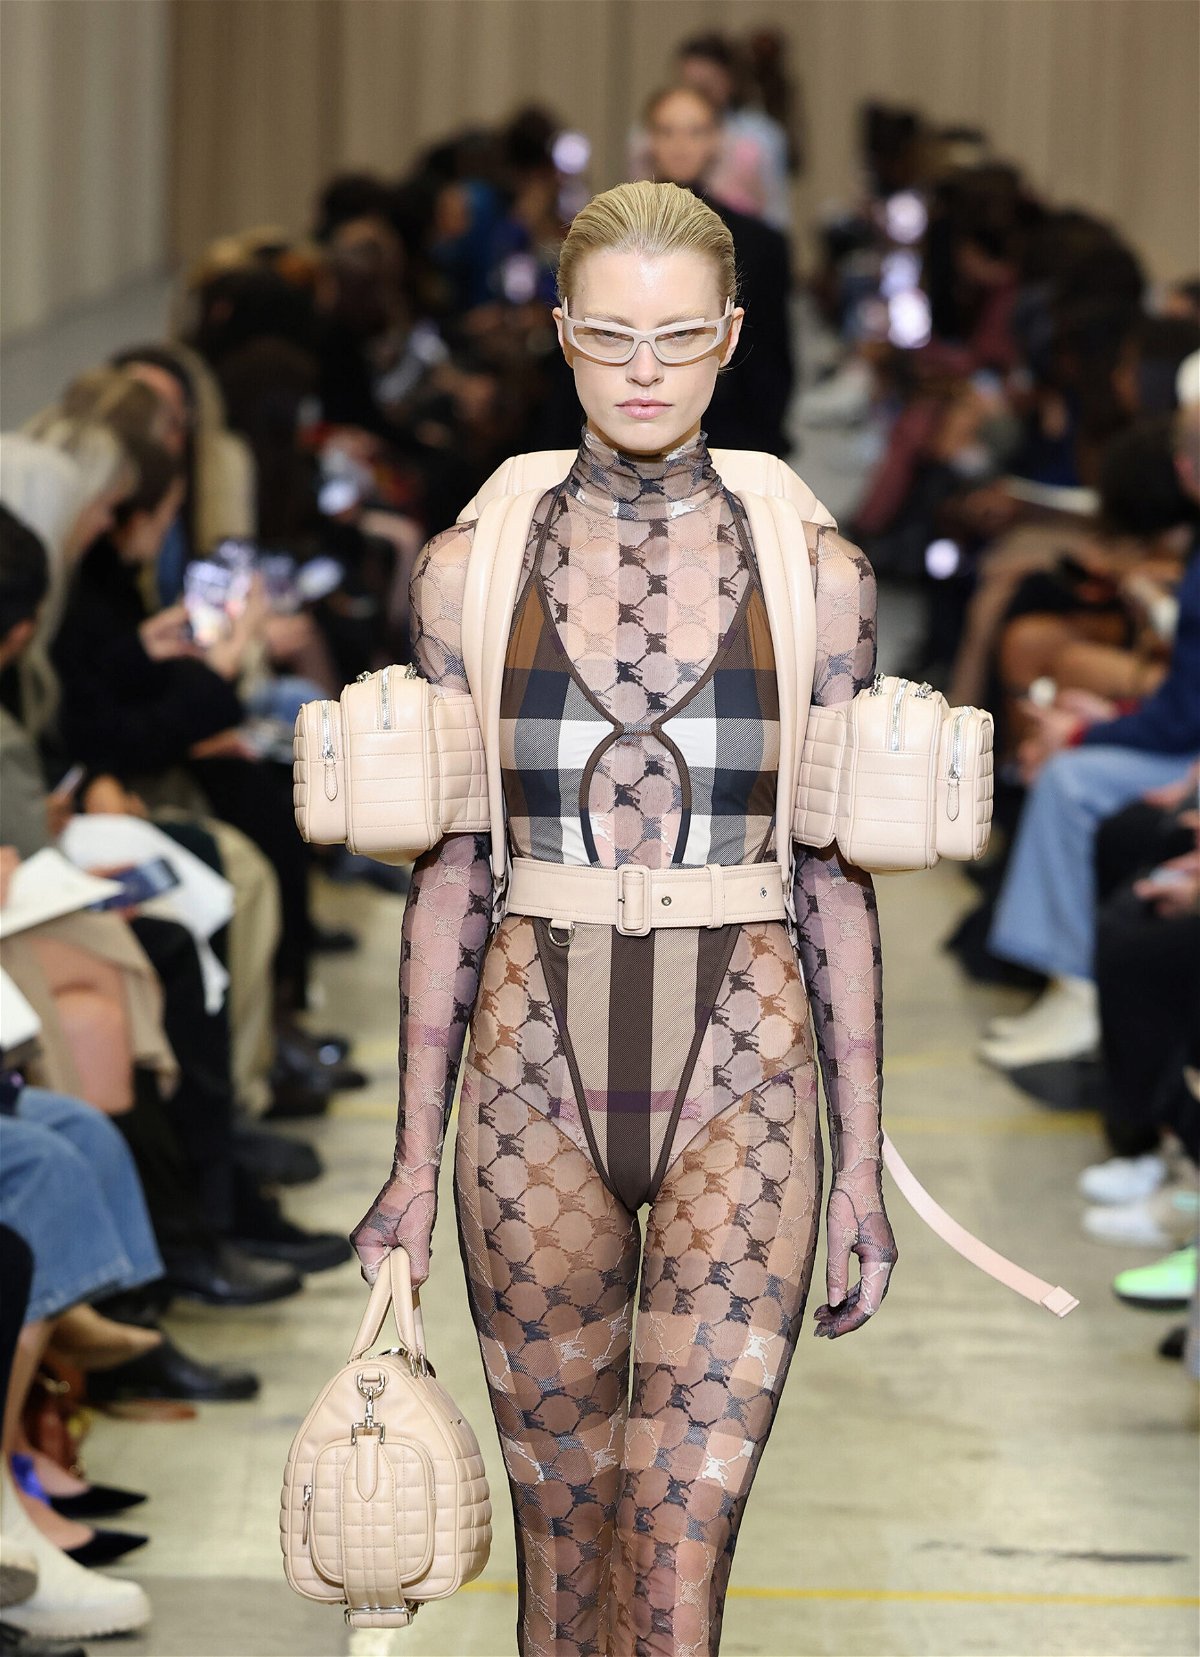 <i>Tim Whitby/BFC/Getty Images</i><br/>Burberry has appointed Daniel Lee